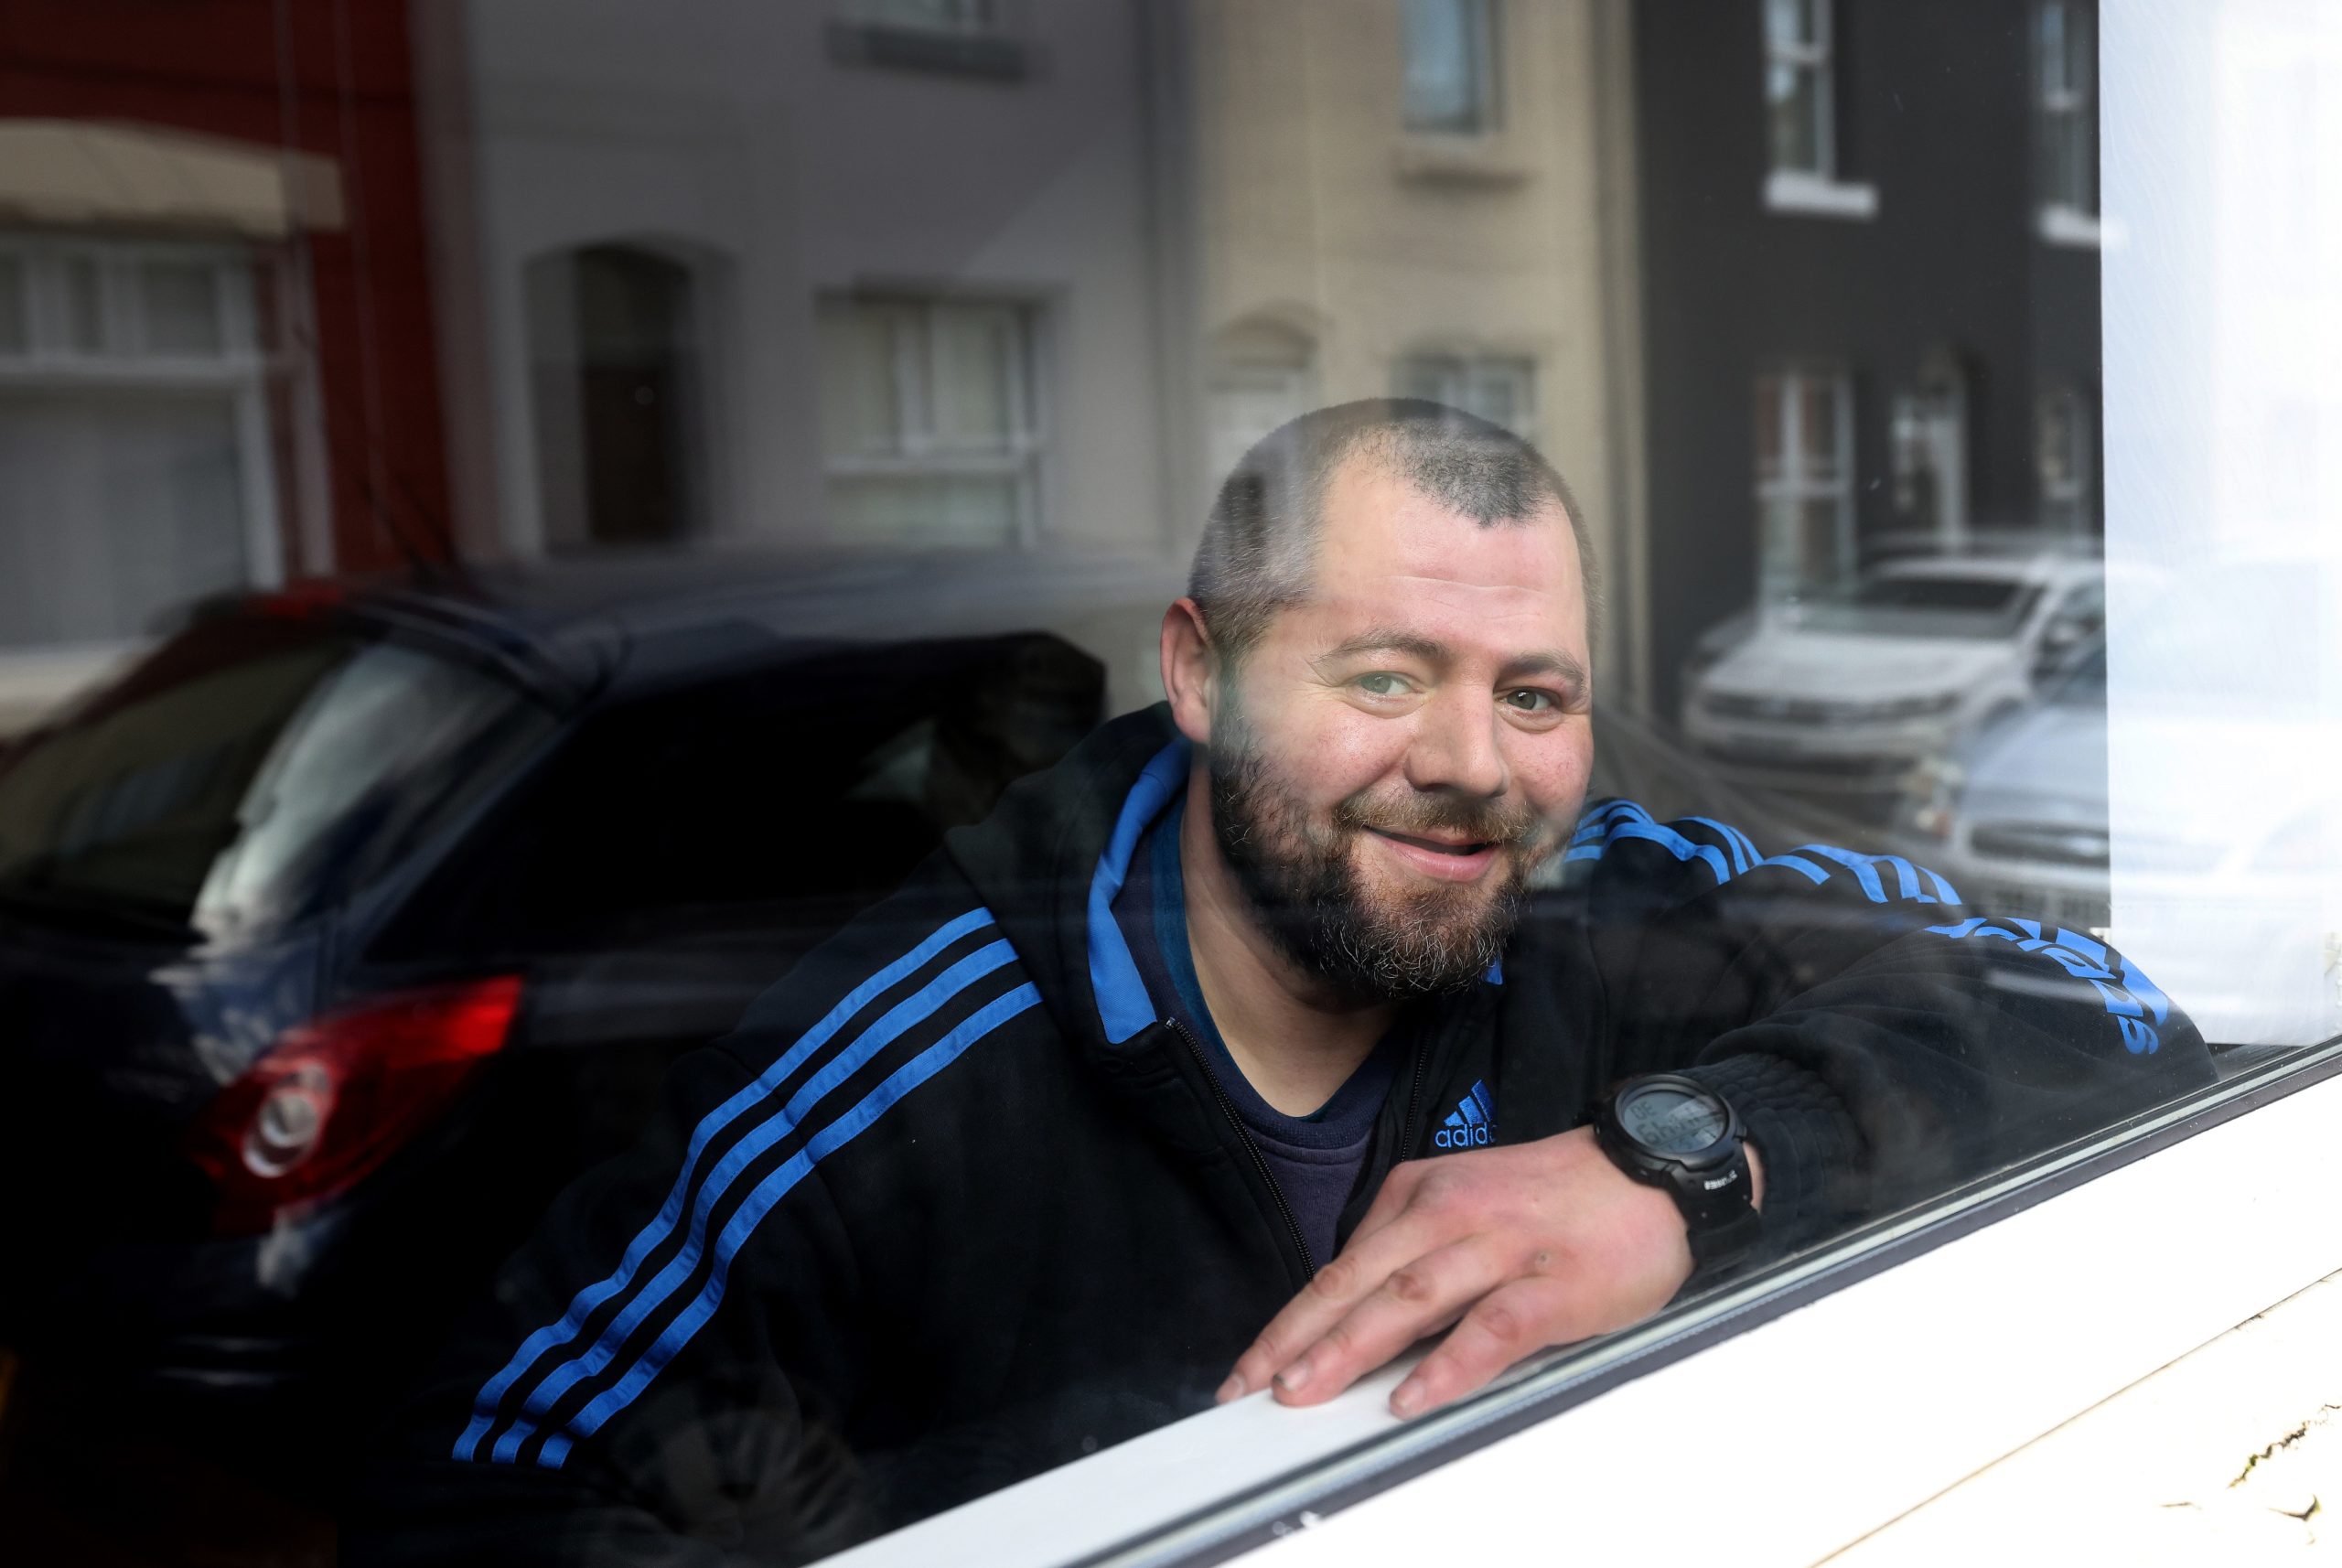 Peter, 40, intermittently slept rough for more than six years but has now moved into a one-bedroom terrace in the city. Under Next Steps Accommodation Programme (NSAP) he is the first person to move into a property with social housing provider Riverside.